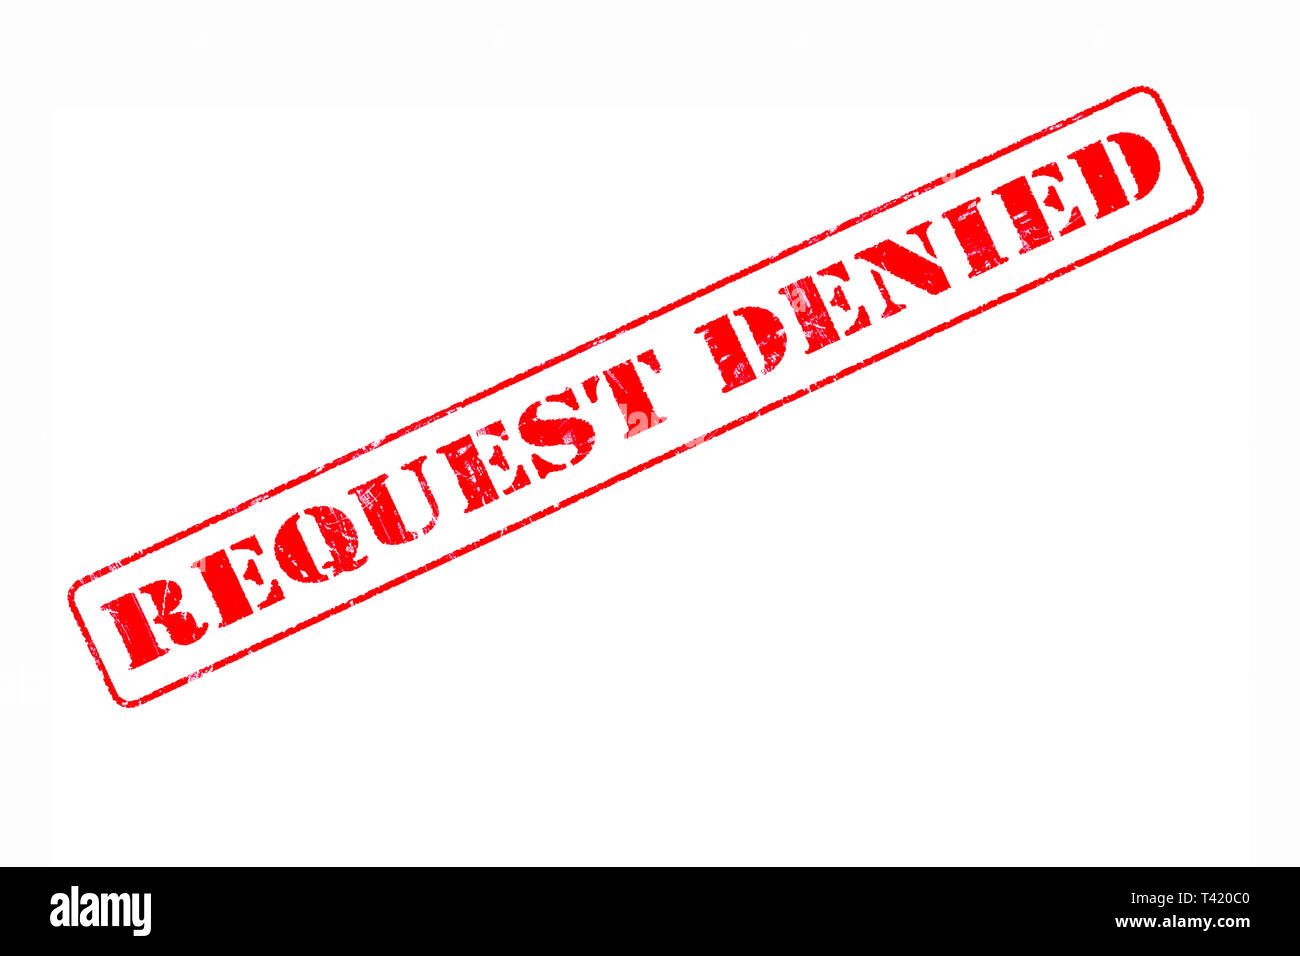 Rubber stamp concept showing a red stamp reading Request Denied Stock Photo